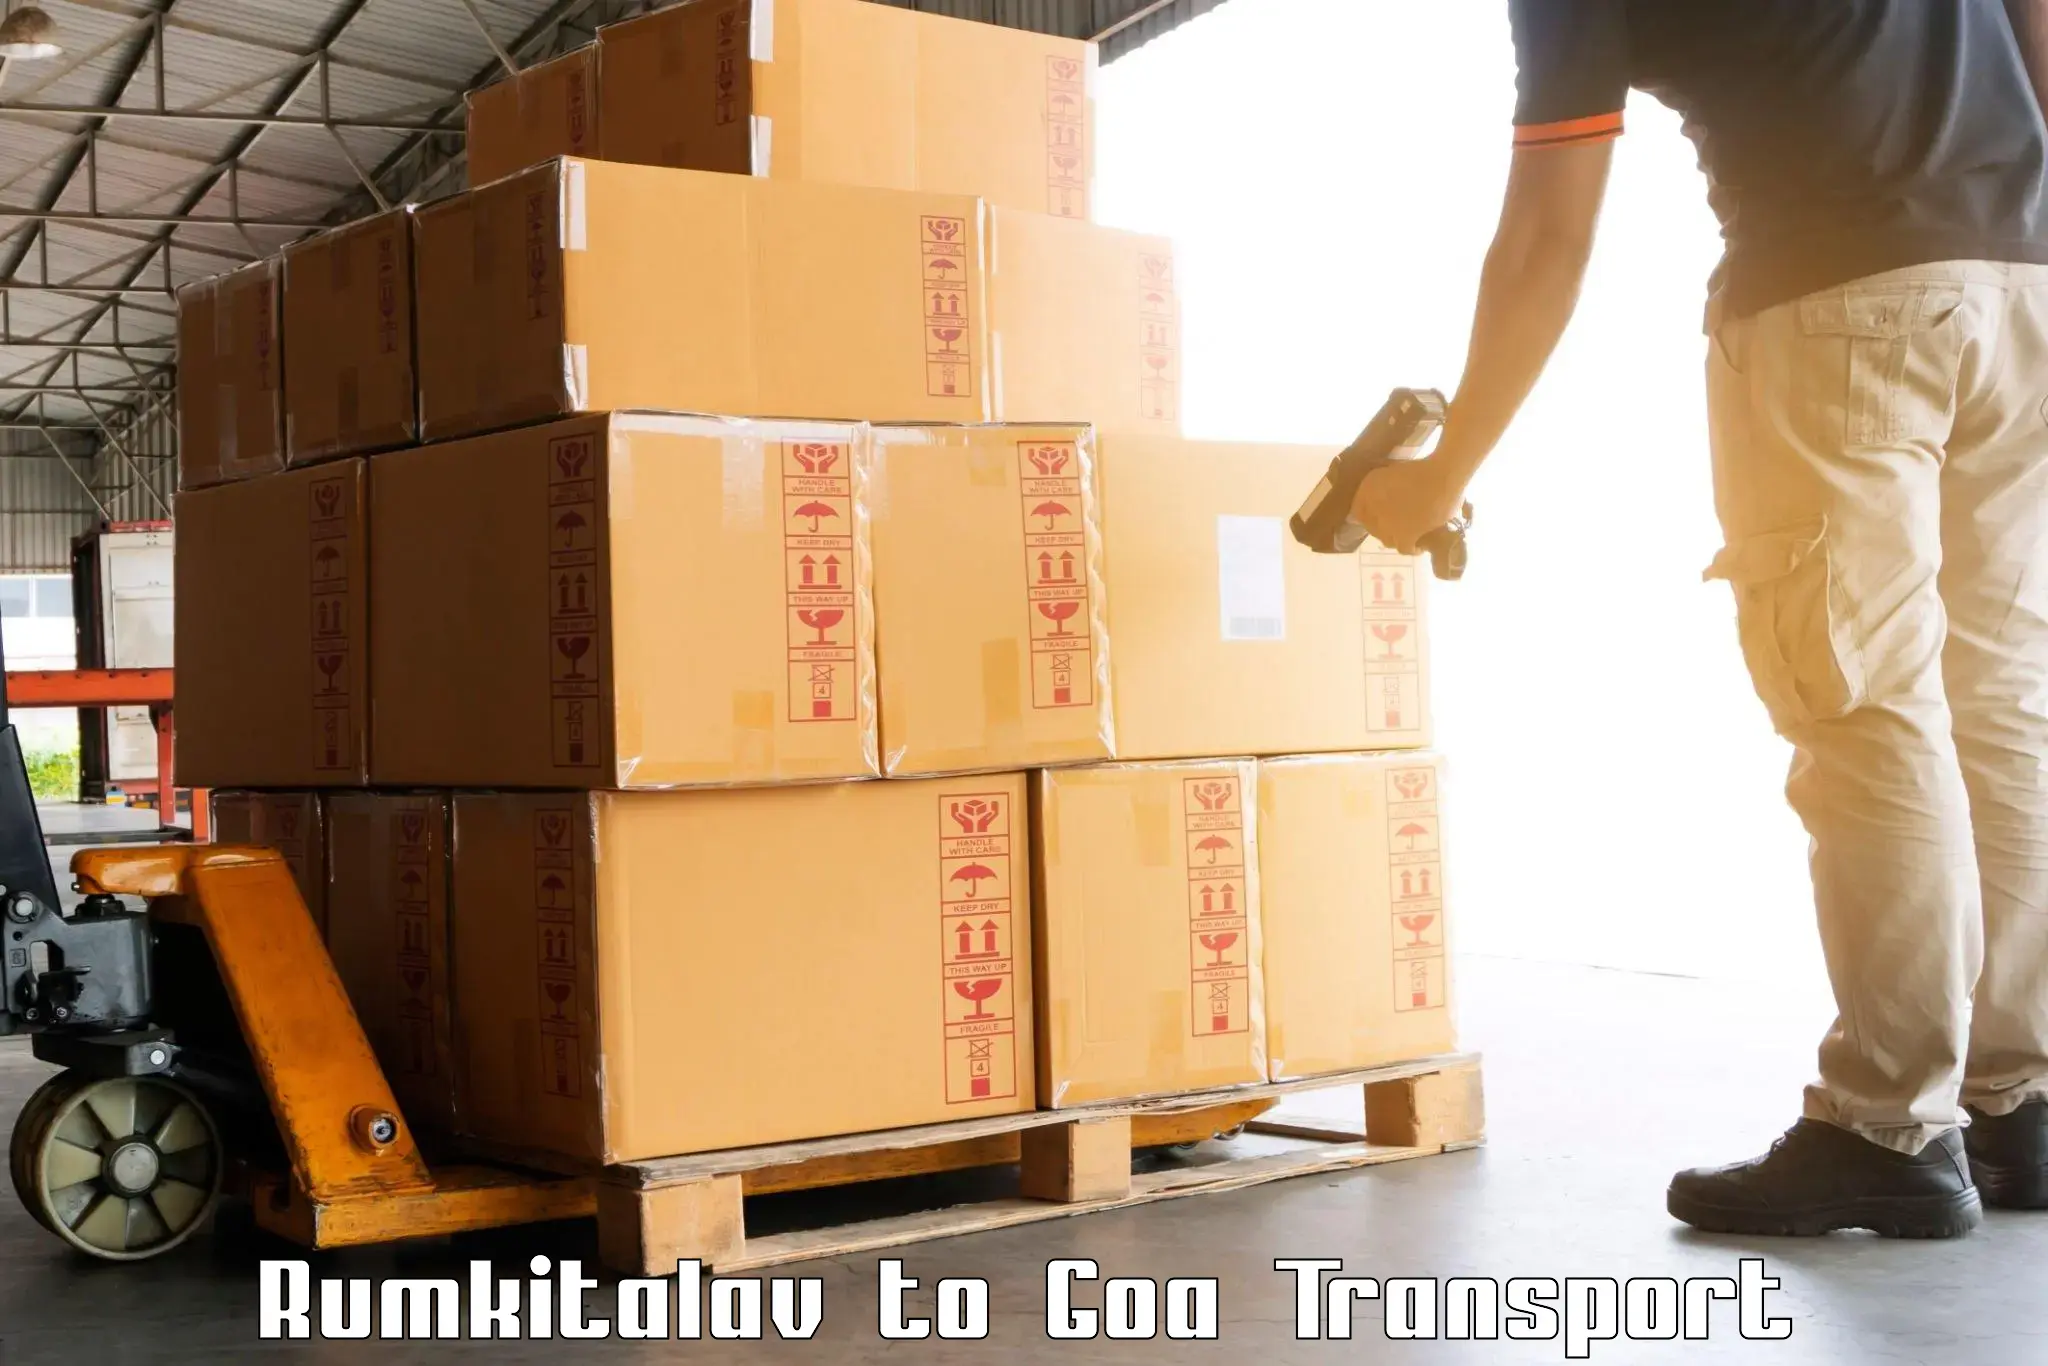 Express transport services Rumkitalav to South Goa